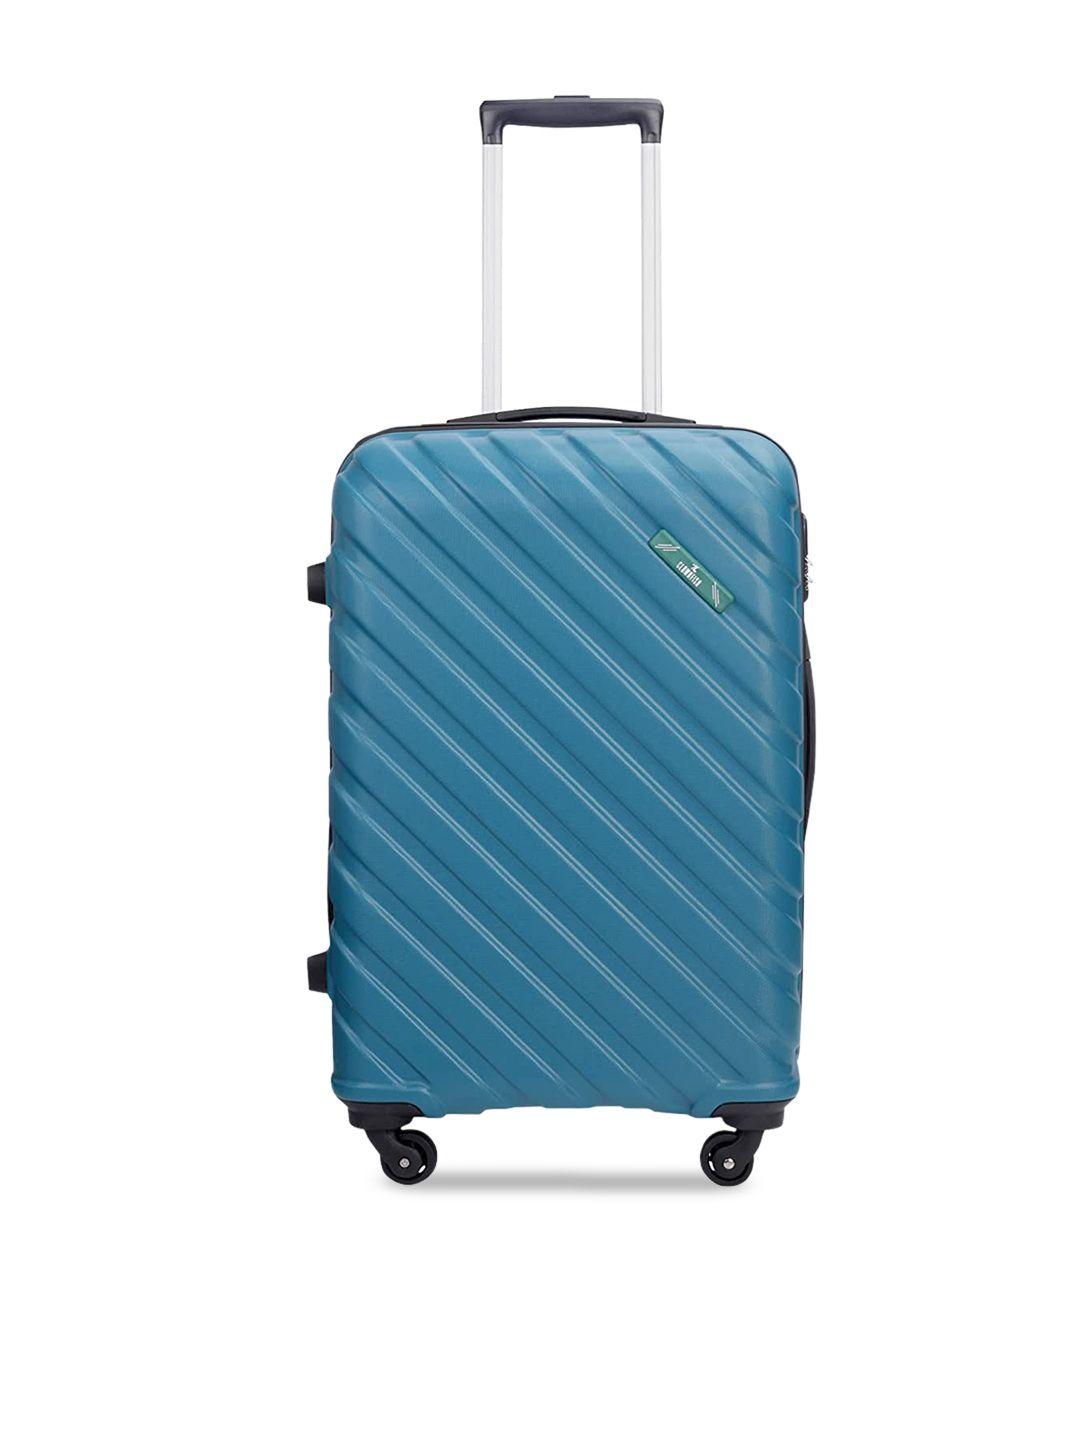 the clownfish armstrong luggage textured hard-sided medium trolley suitcase